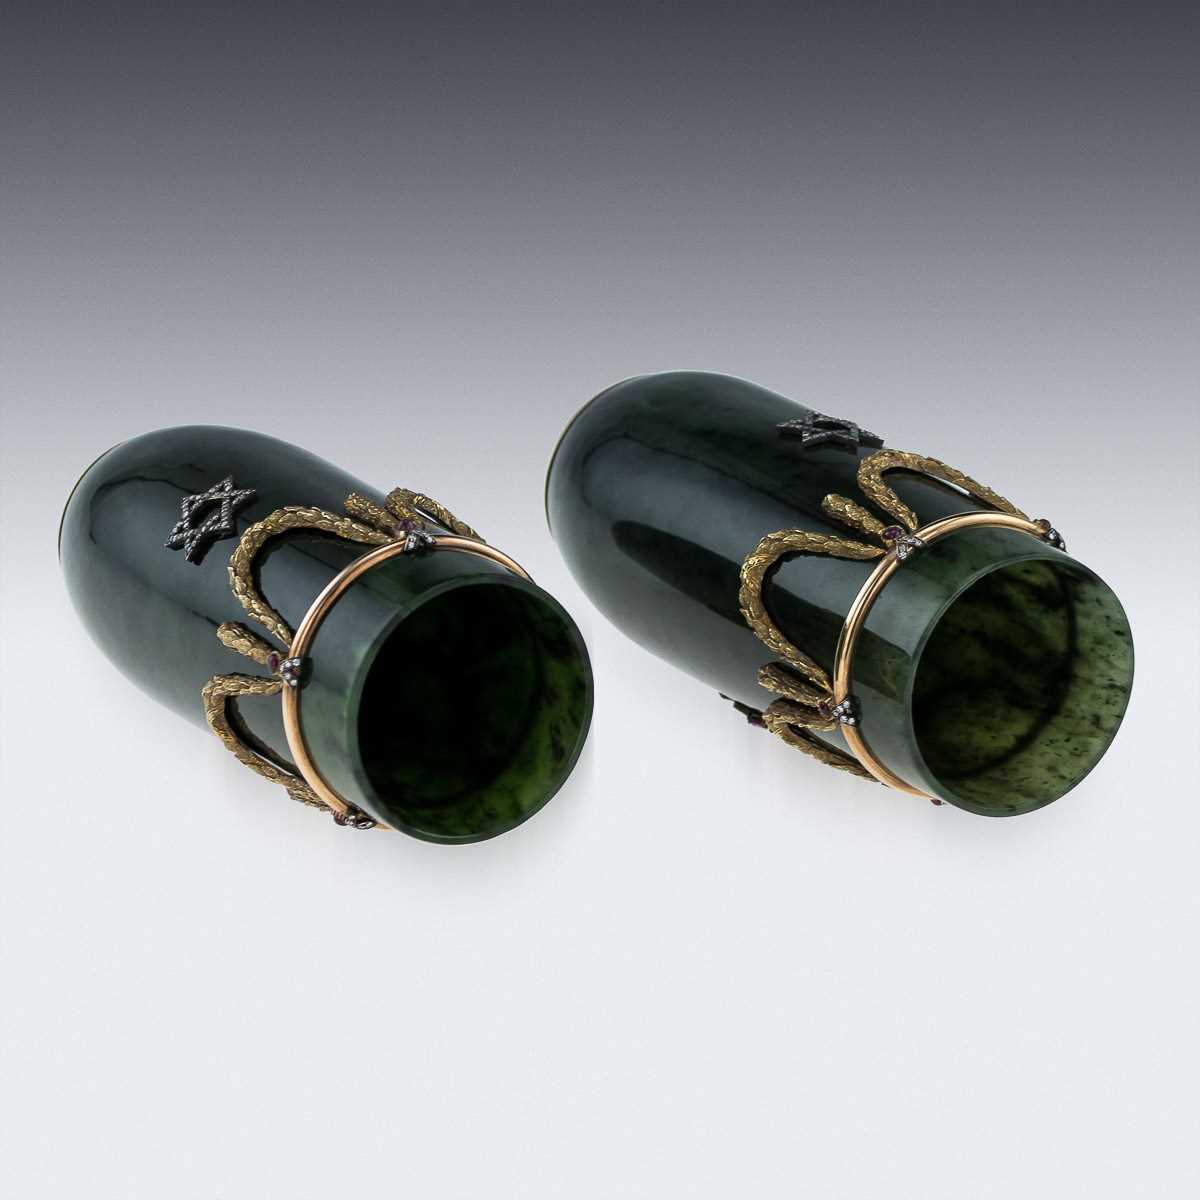 A PAIR 14K GOLD, NEPHRITE, DIAMOND AND RUBY ENCRUSTED VASES IN THE STYLE OF FABERGE - Image 6 of 28